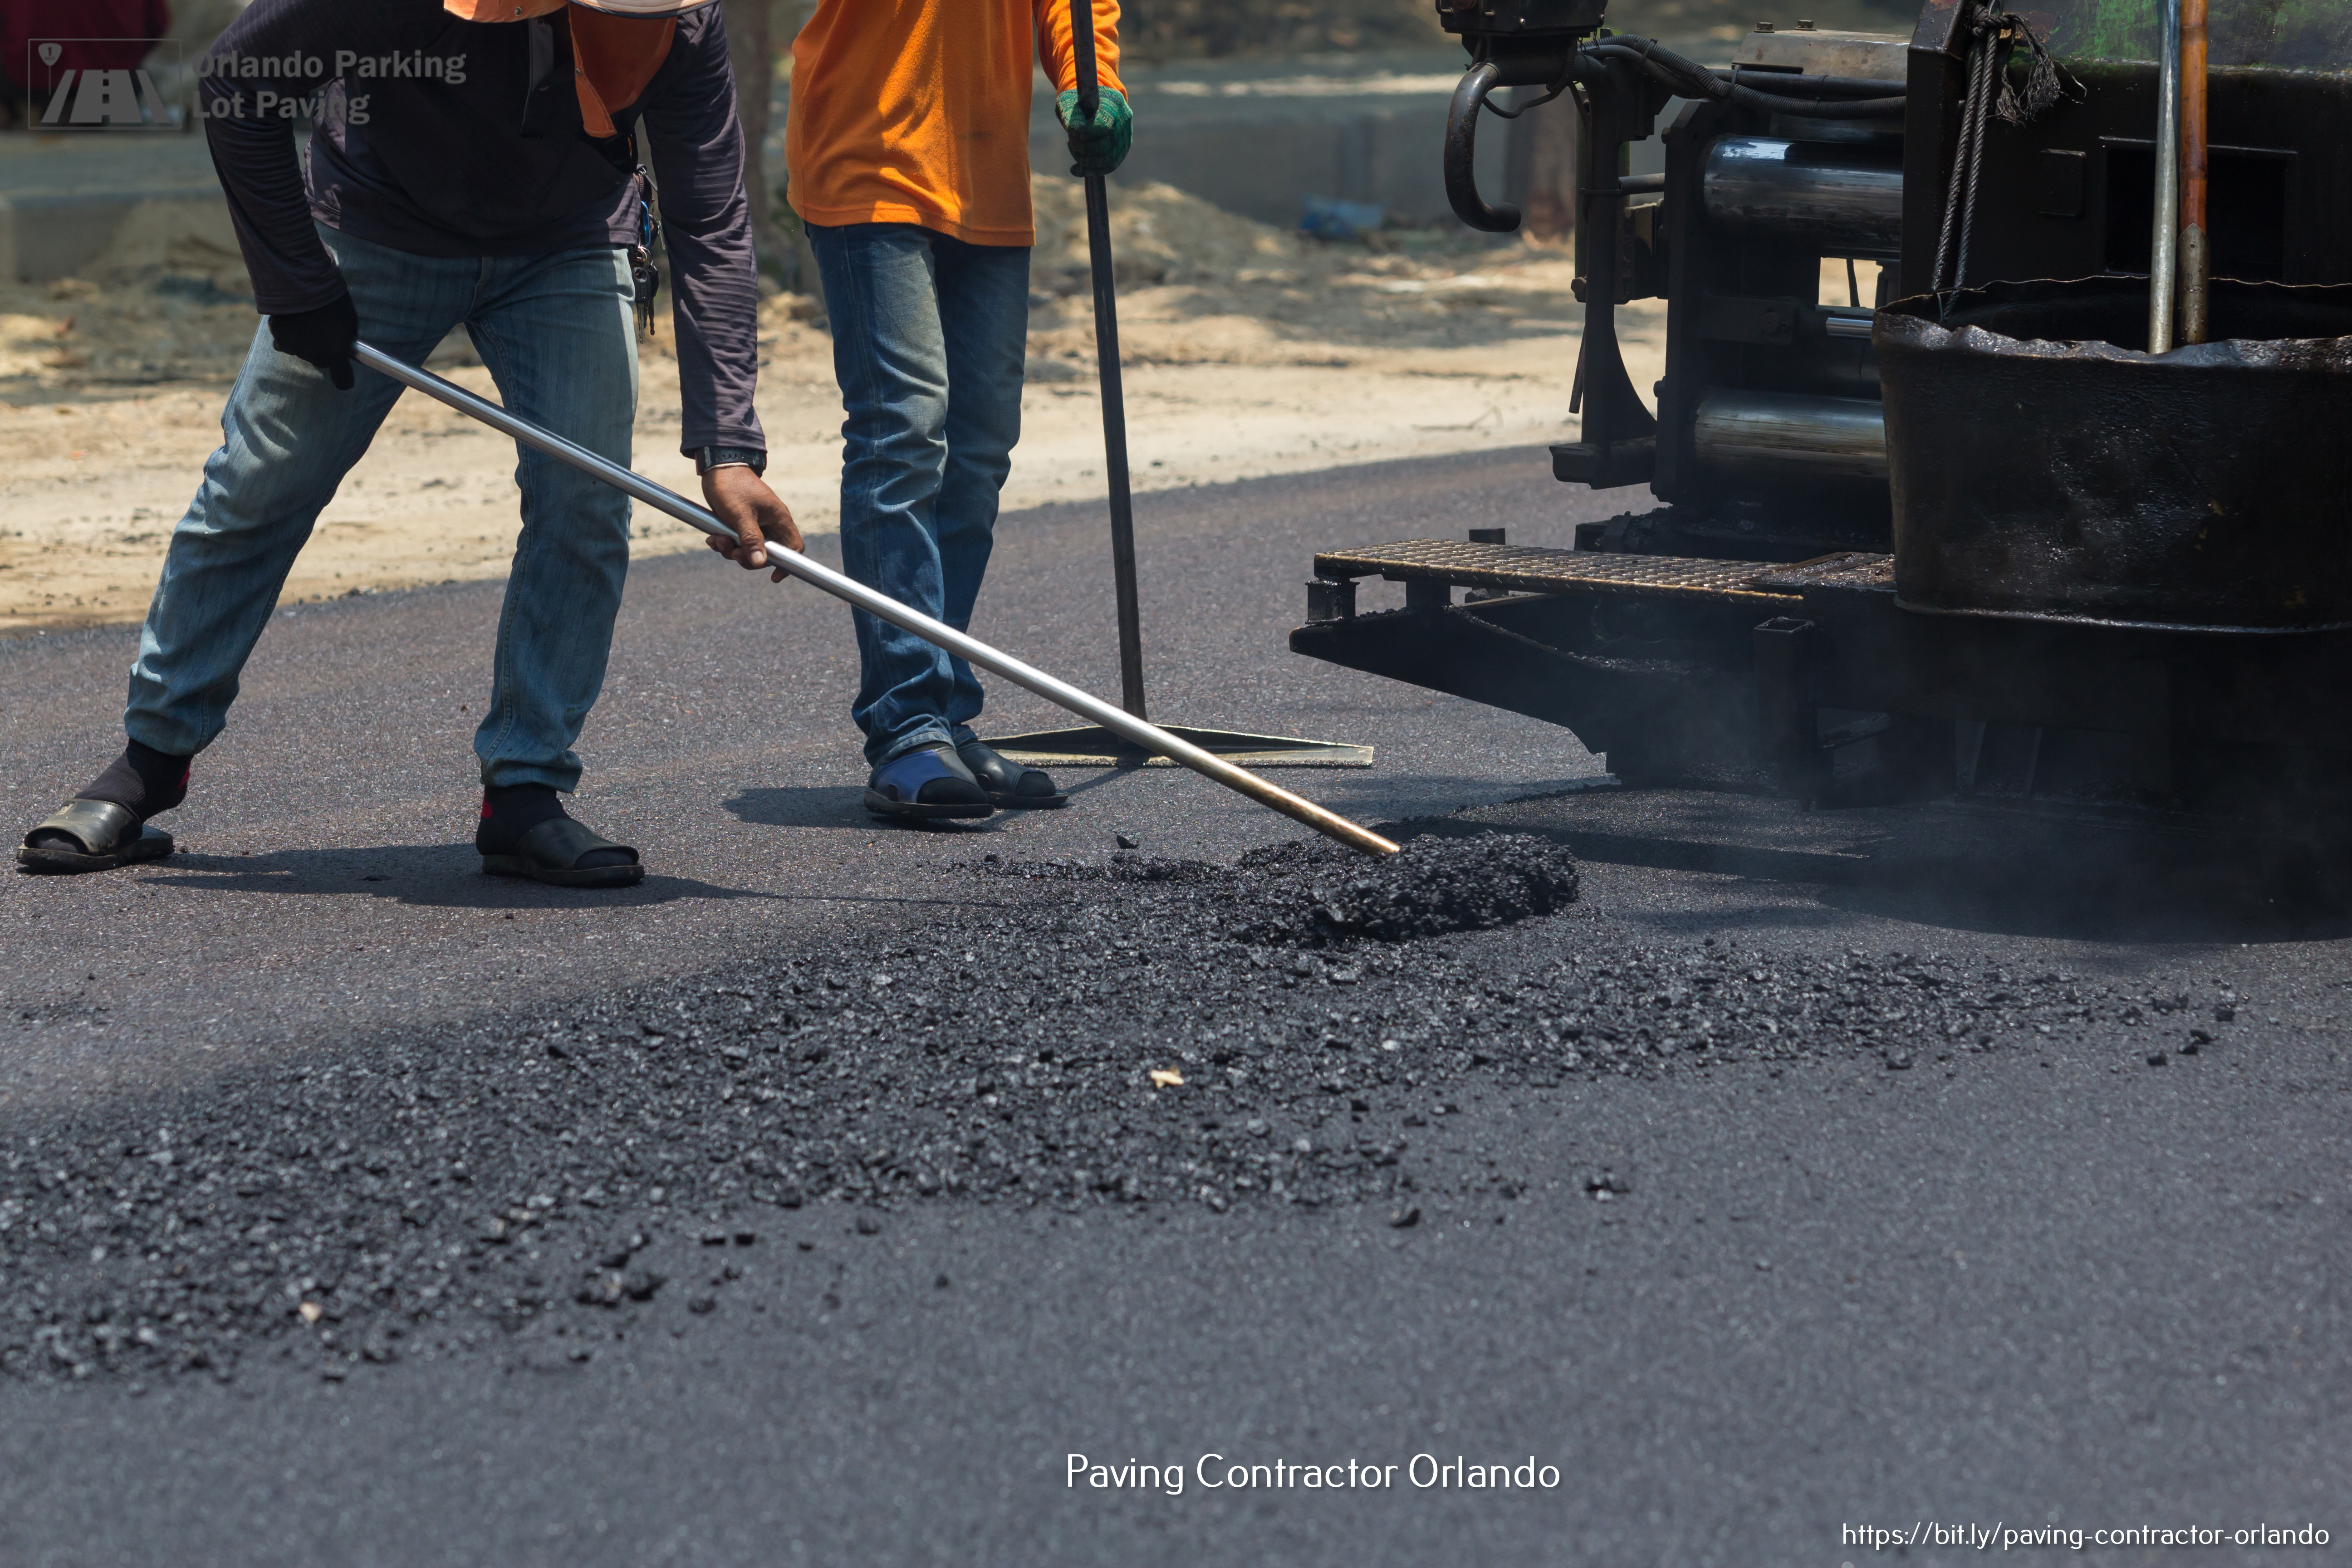 Orlando Parking Lot Paving Highlights The Qualities Of An Excellent Paving Contractor In Orlando, Fl.